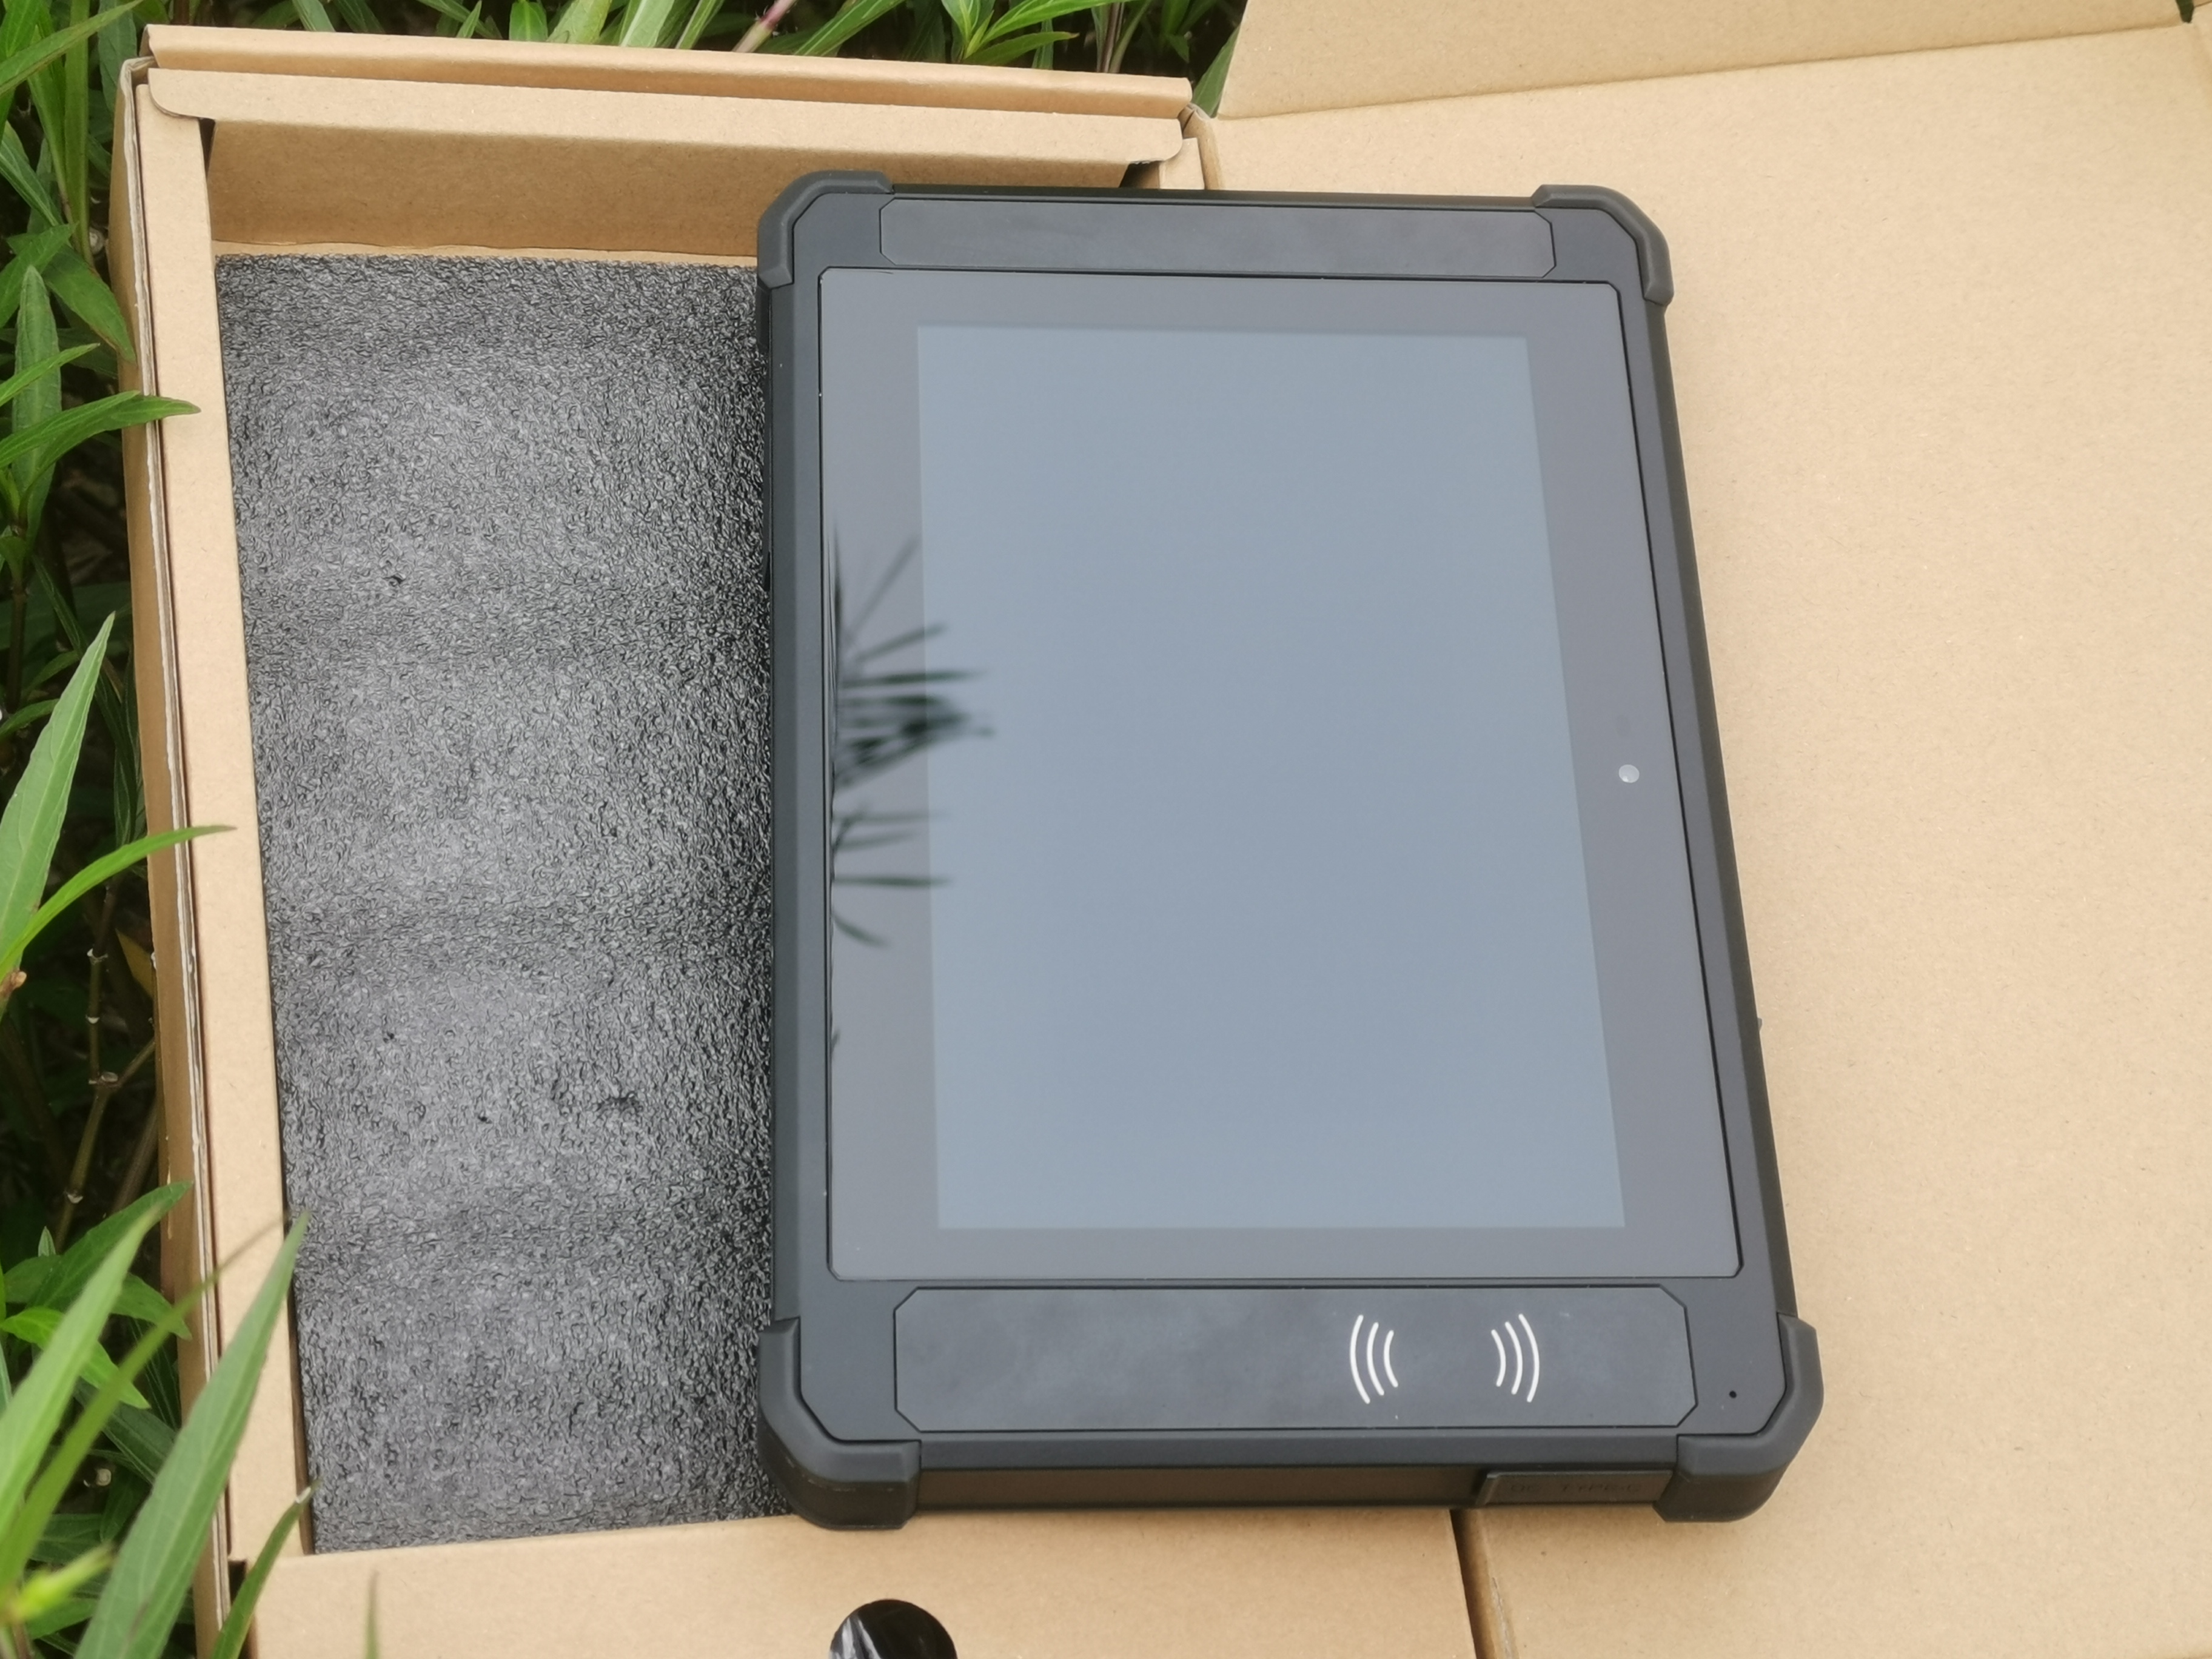 differences between rugged tablets and medical tablets?